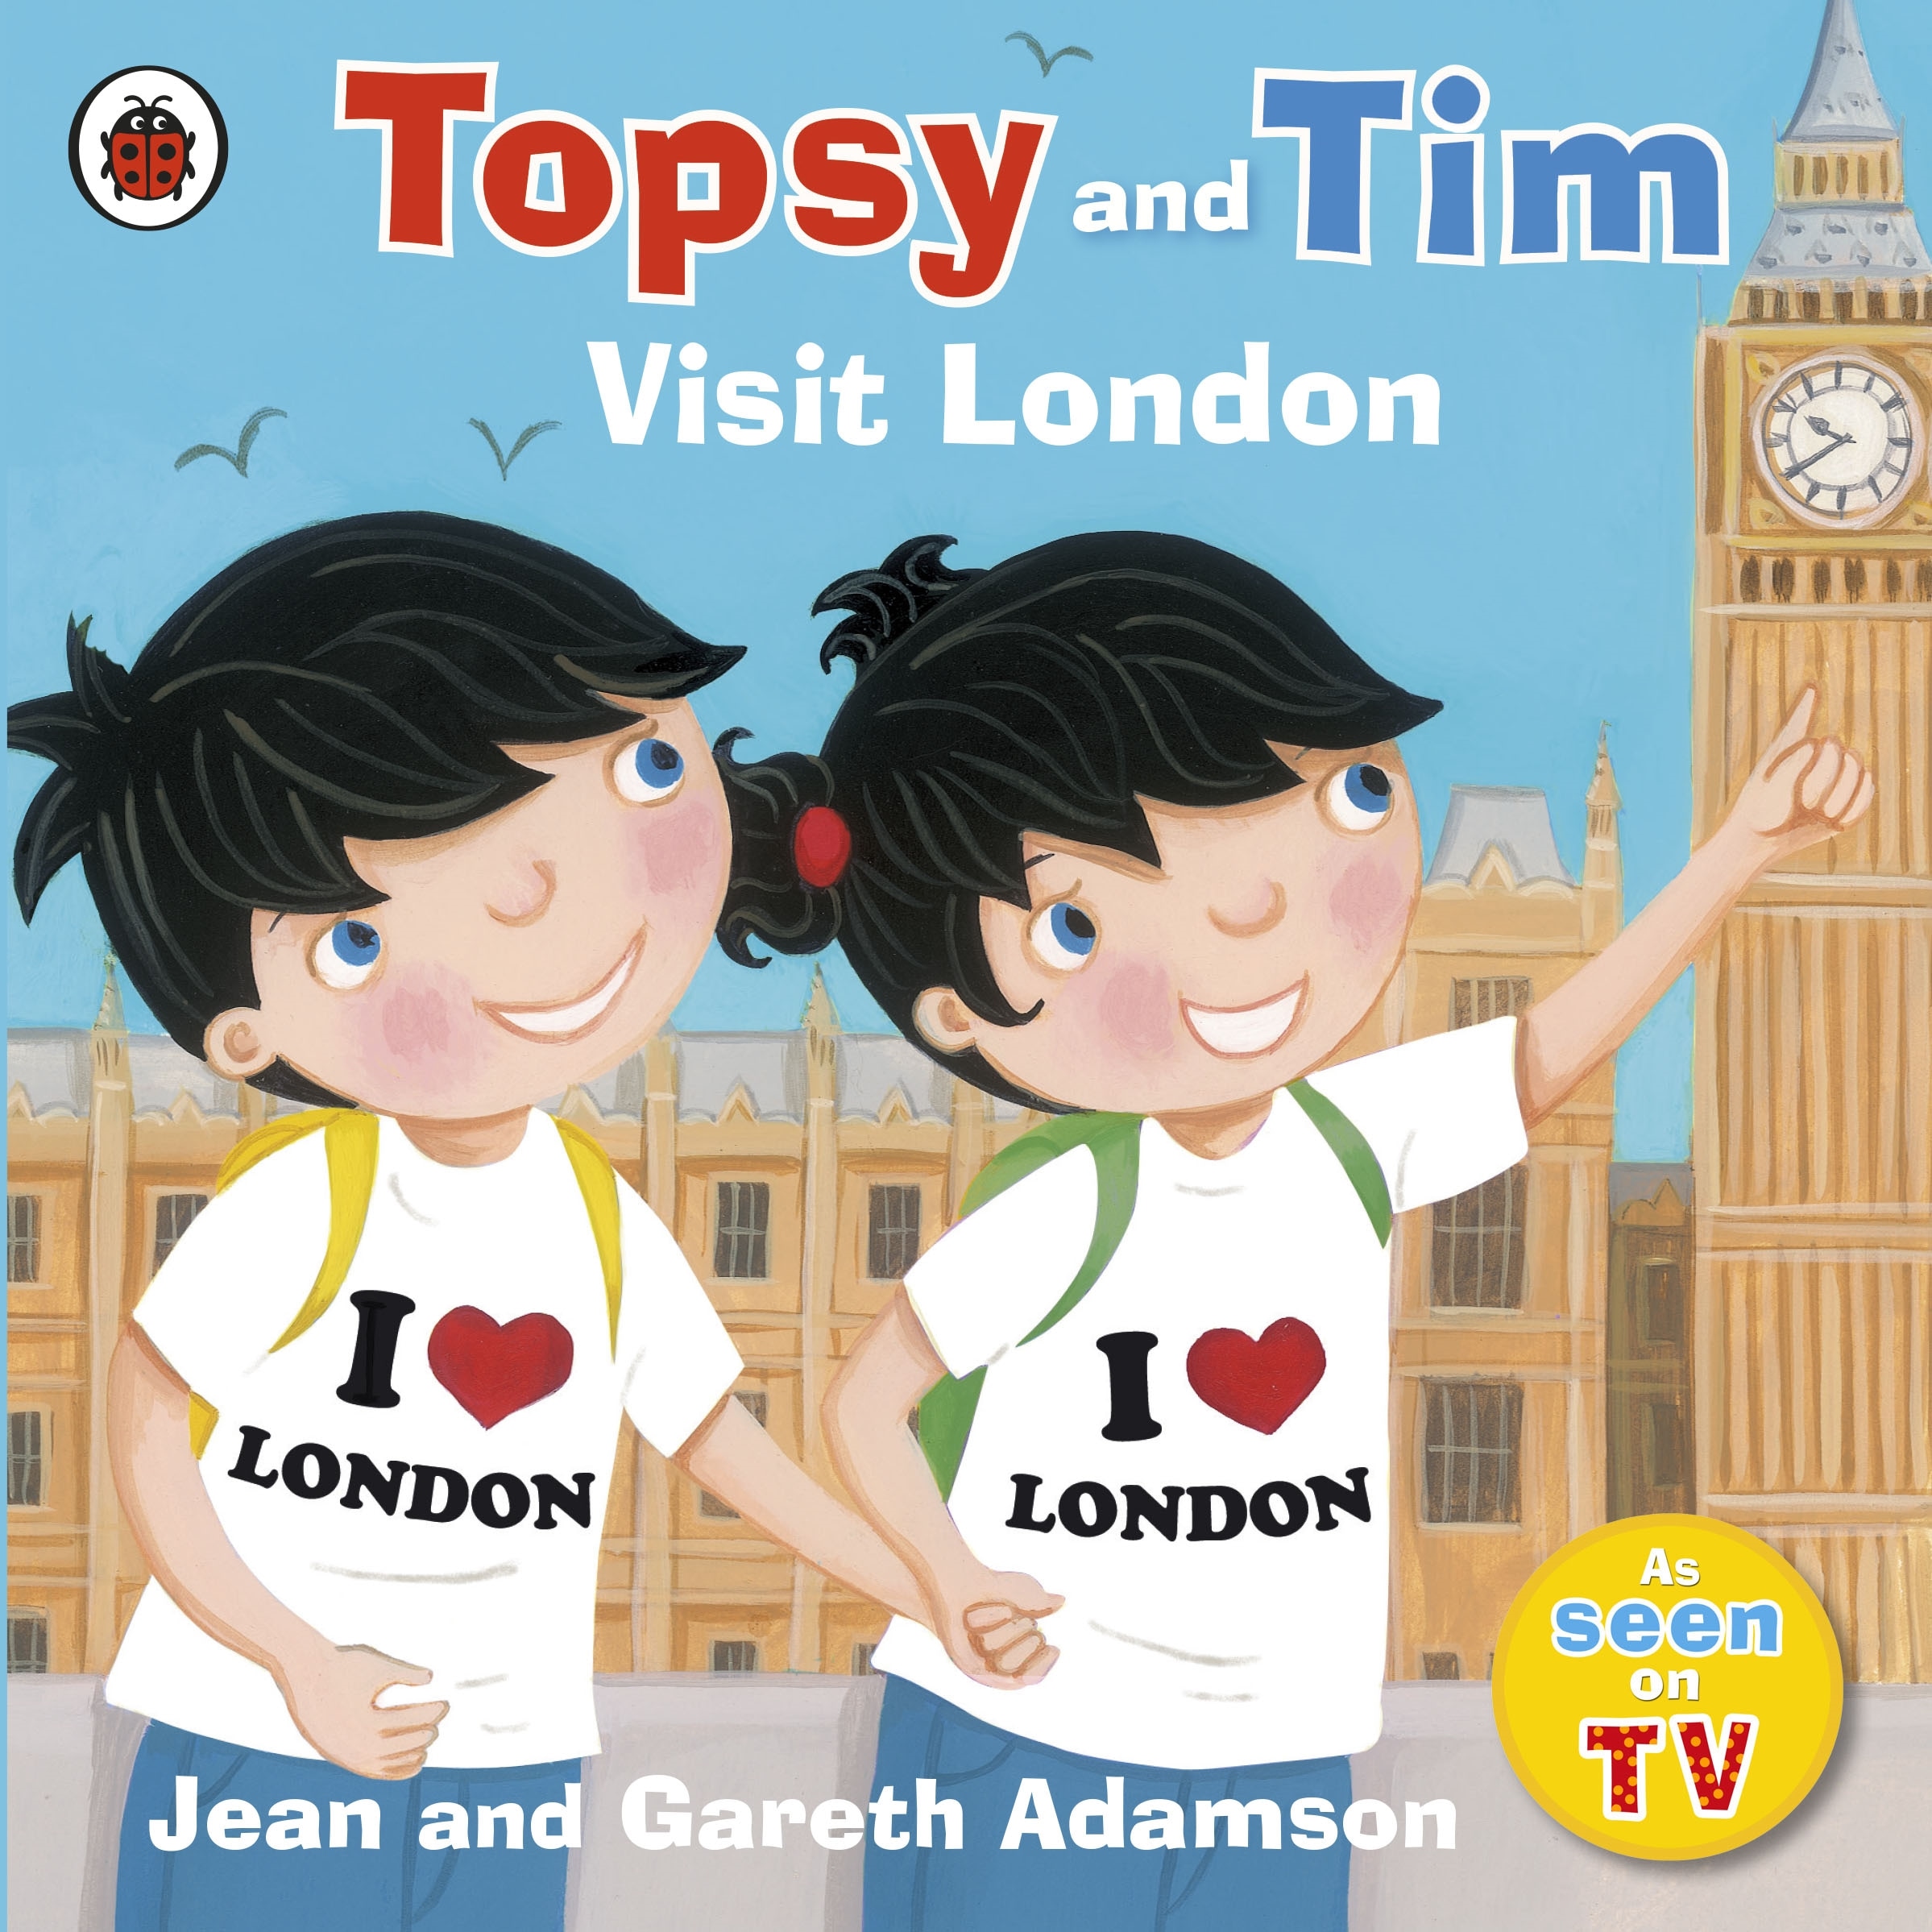 Book “Topsy and Tim: Visit London” by Jean Adamson — February 2, 2012